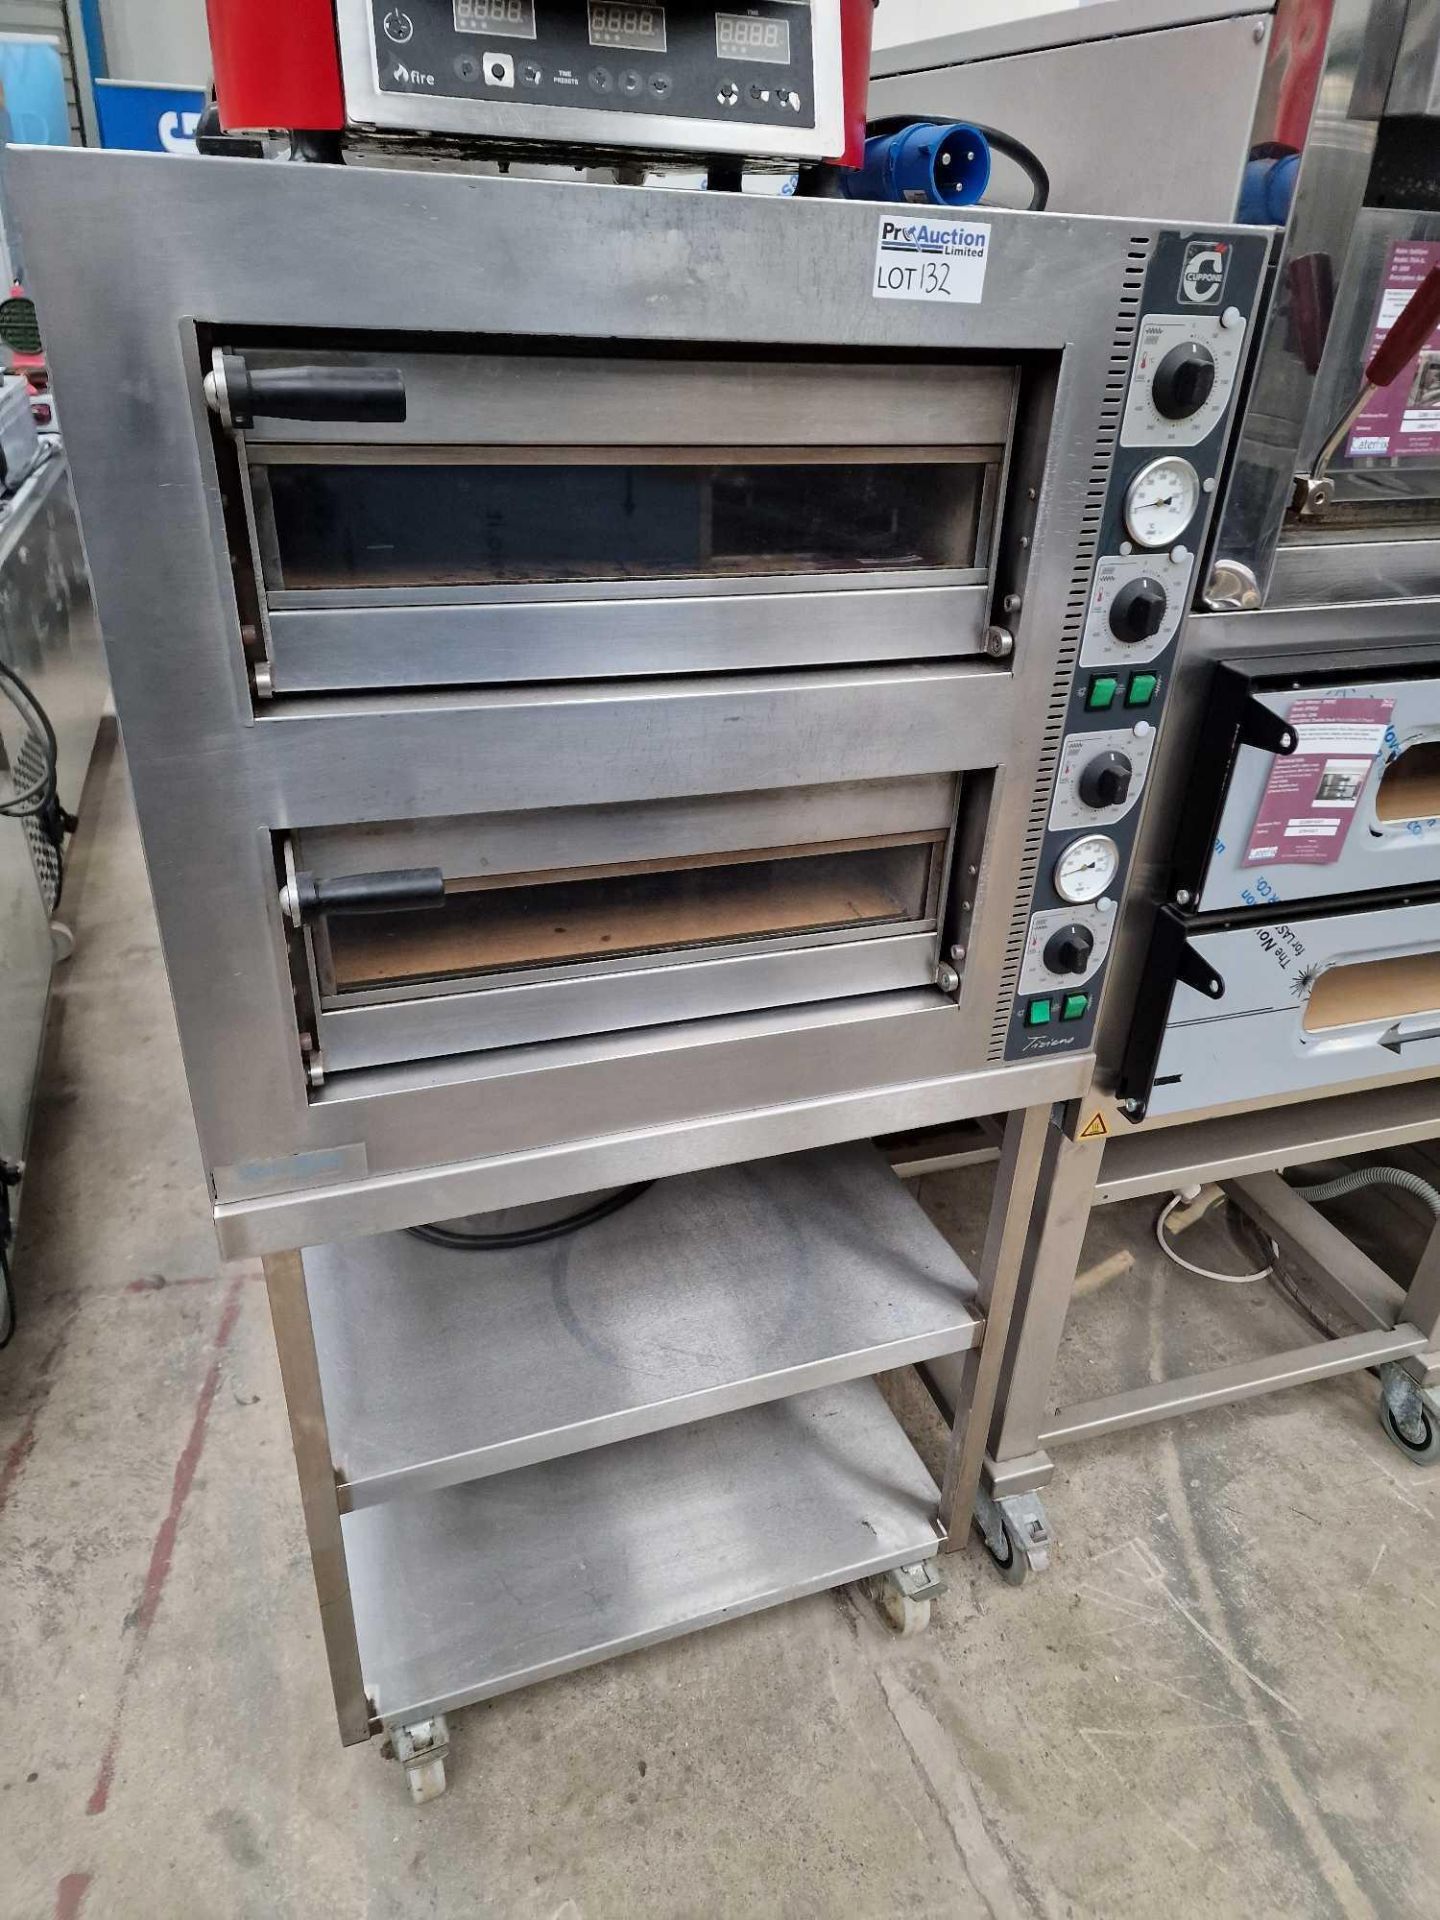 Linda Lewis Stainless Steel Twin Deck Pizza Oven Tech Spec: TZ425/2M-A5-CP, Single Phase,